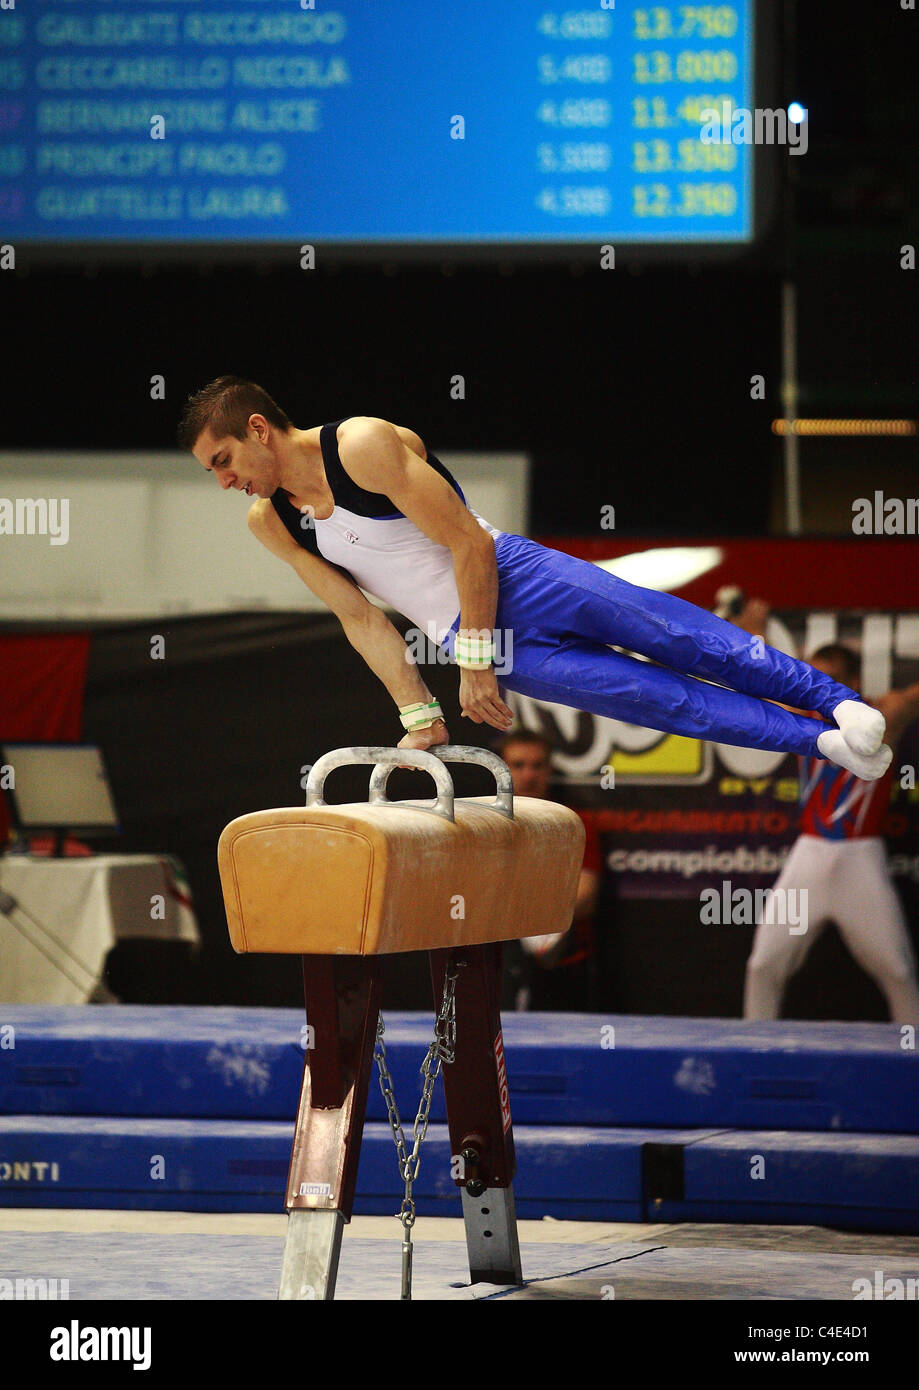 Gymnastics competition: Lorenzo Ticchi is performing his pommel horse routine Stock Photo